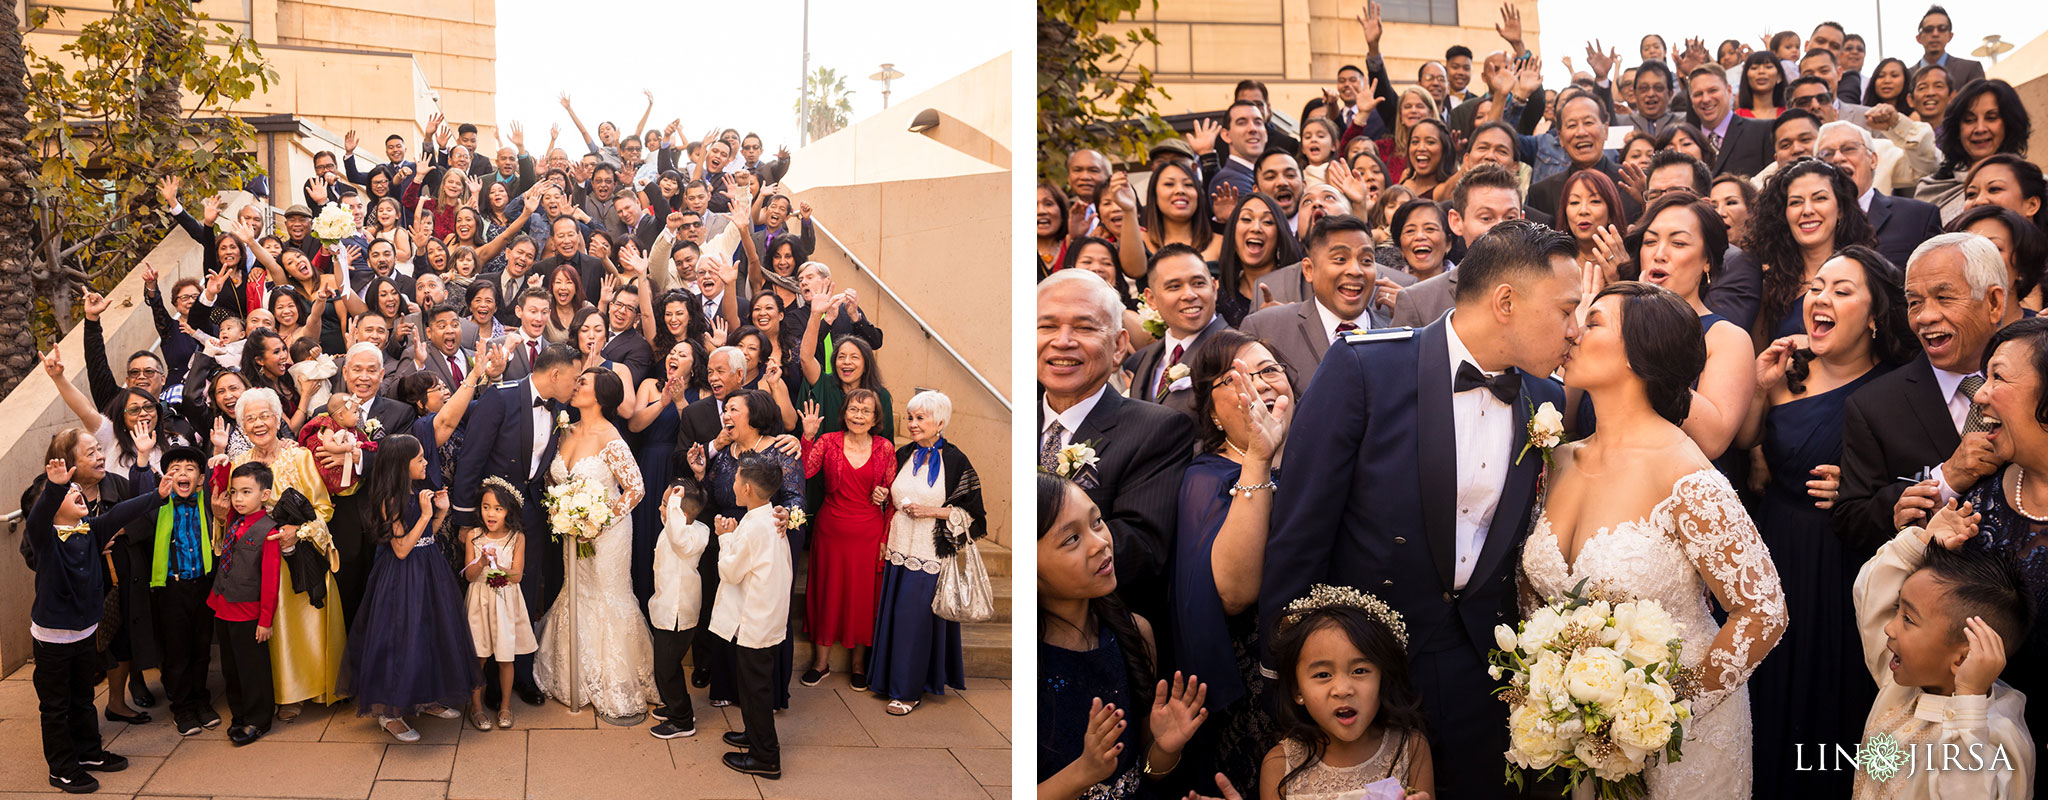 26 cathedral of our lady of angels wedding ceremony photography